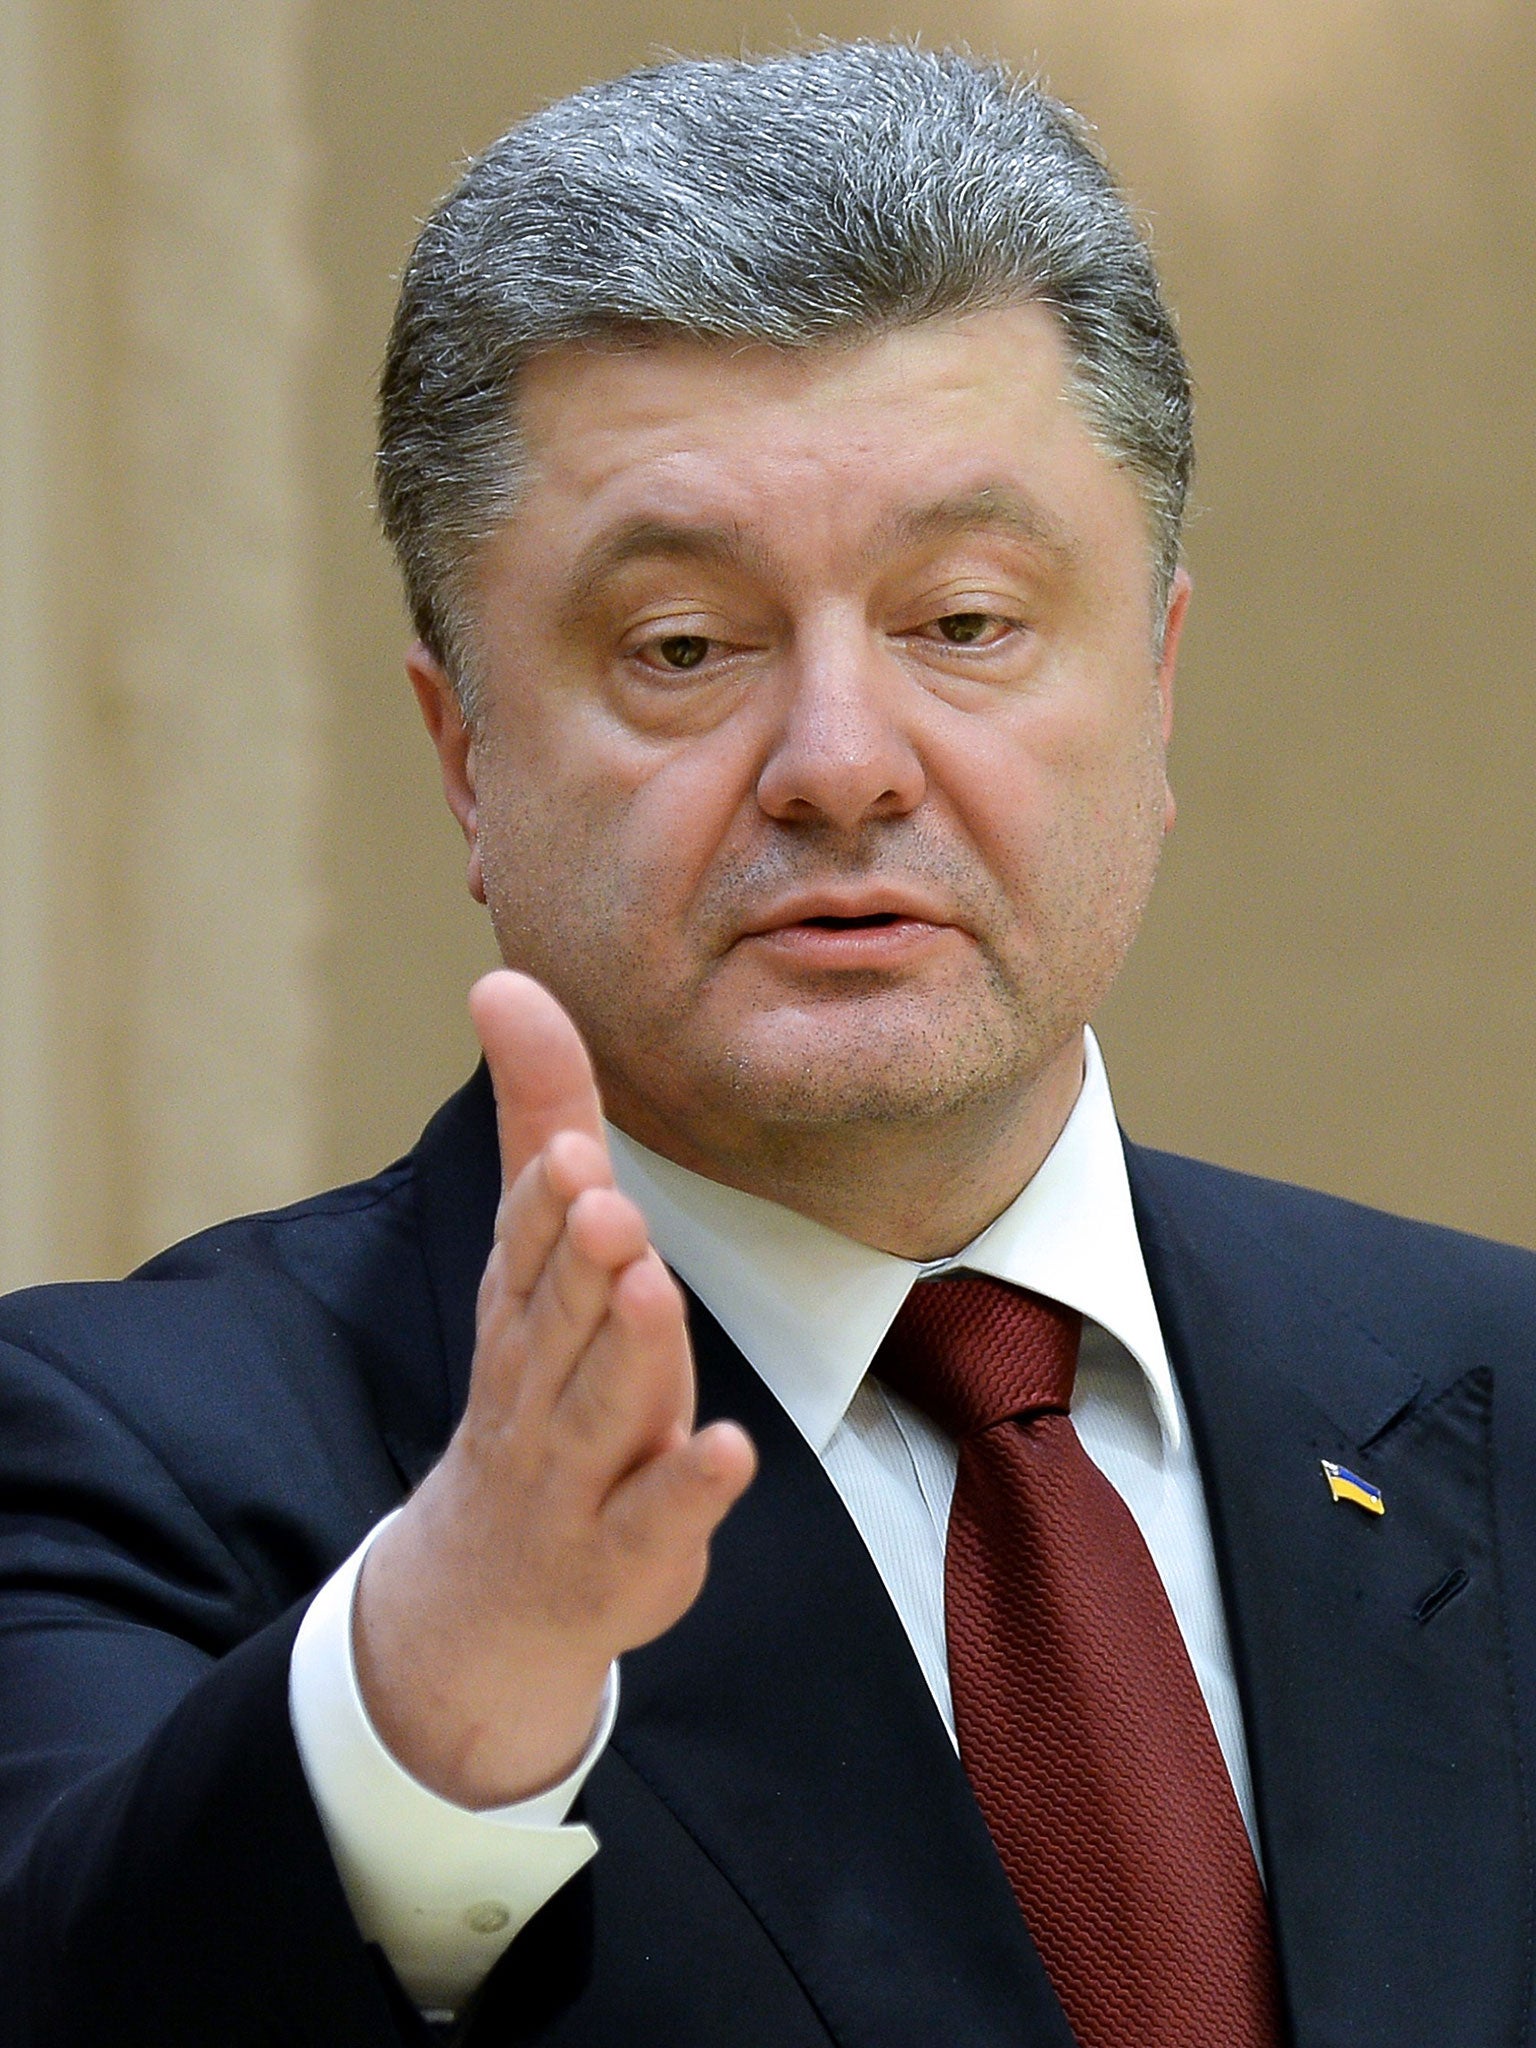 ‘This is not the end of the war, but instead a change in tactics by Russia,’ says President Poroshenko